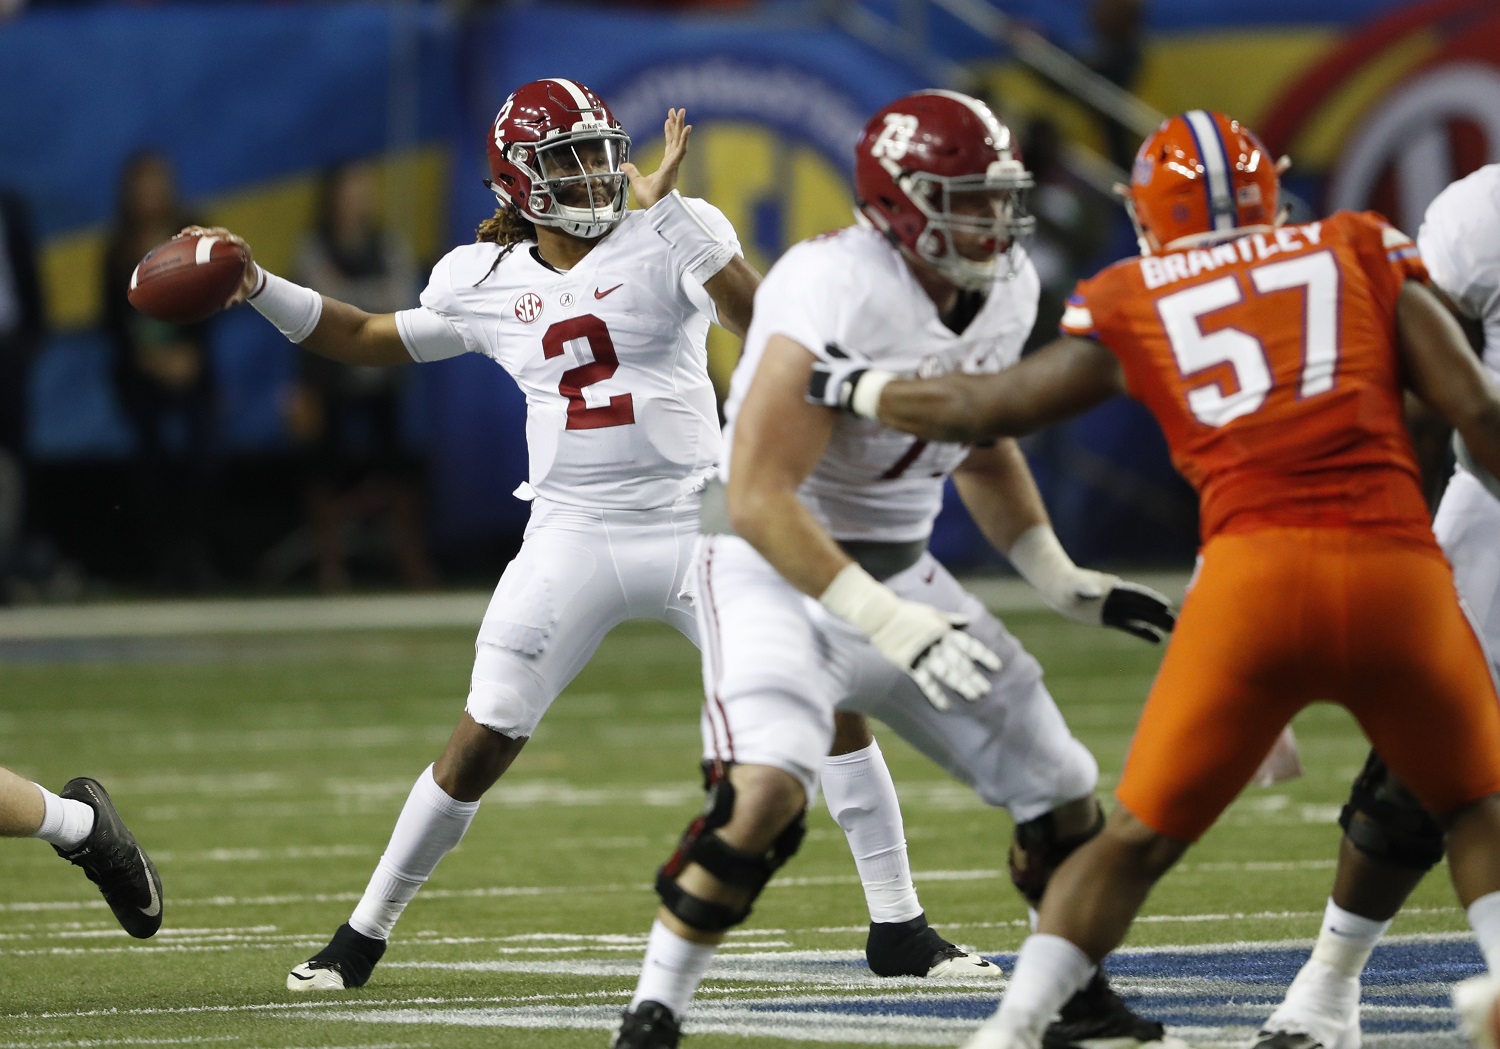 Alabama quarterback Jalen Hurts (2) works against Florida during the first half of the Southeastern Conference championship NCAA college football game, Saturday, Dec. 3, 2016, in Atlanta.(AP Photo/John Bazemore)